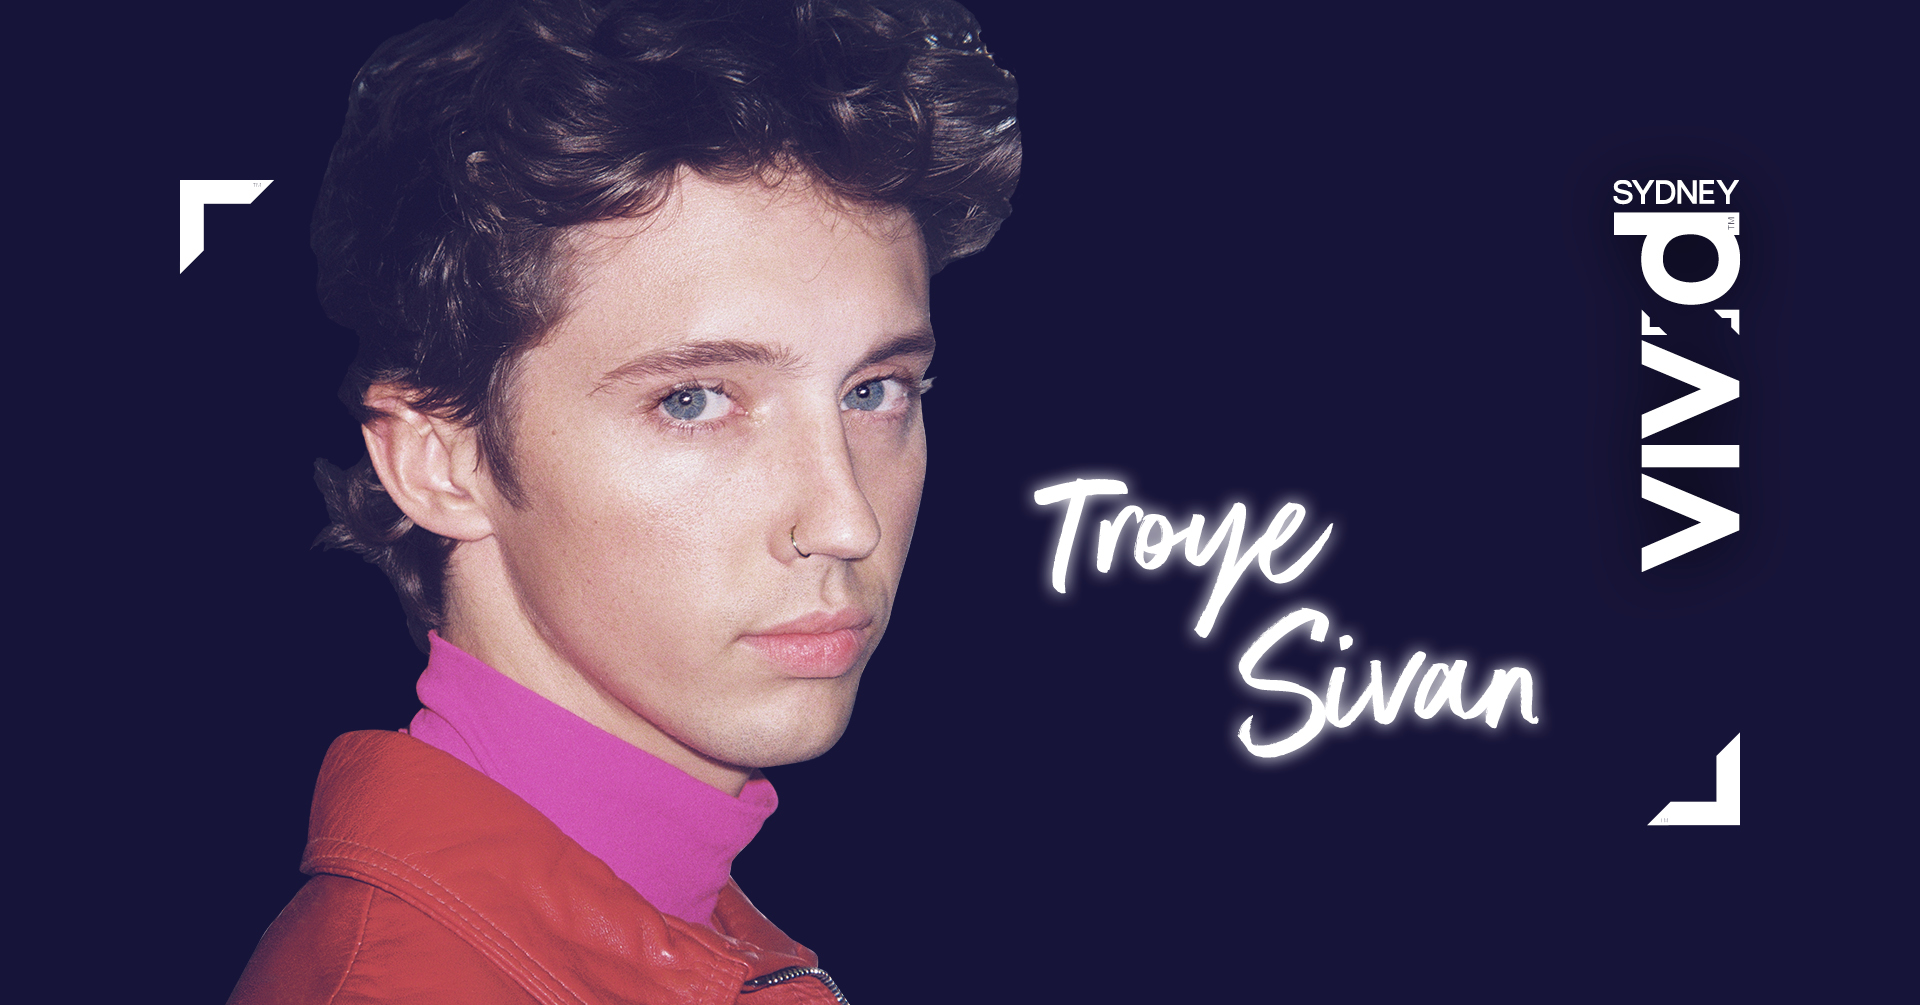 Troye Sivan - talking Beauty, Art and Fluidity with Pat Abboud (VIVID) [Sydney]